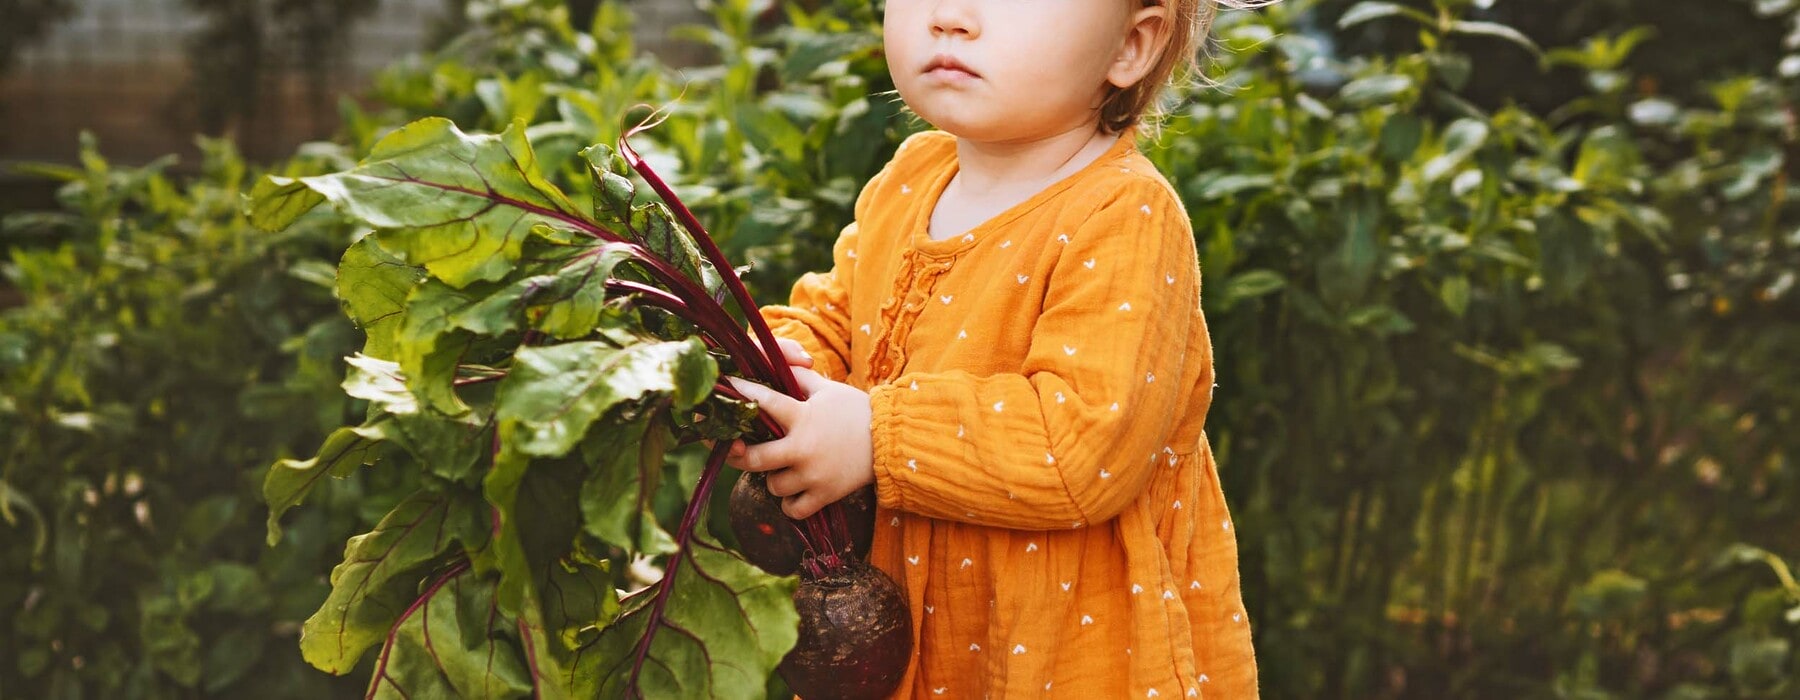 Child girl with beets freshly picked from garden healthy food organic vegetables home grown harvest agriculture concept